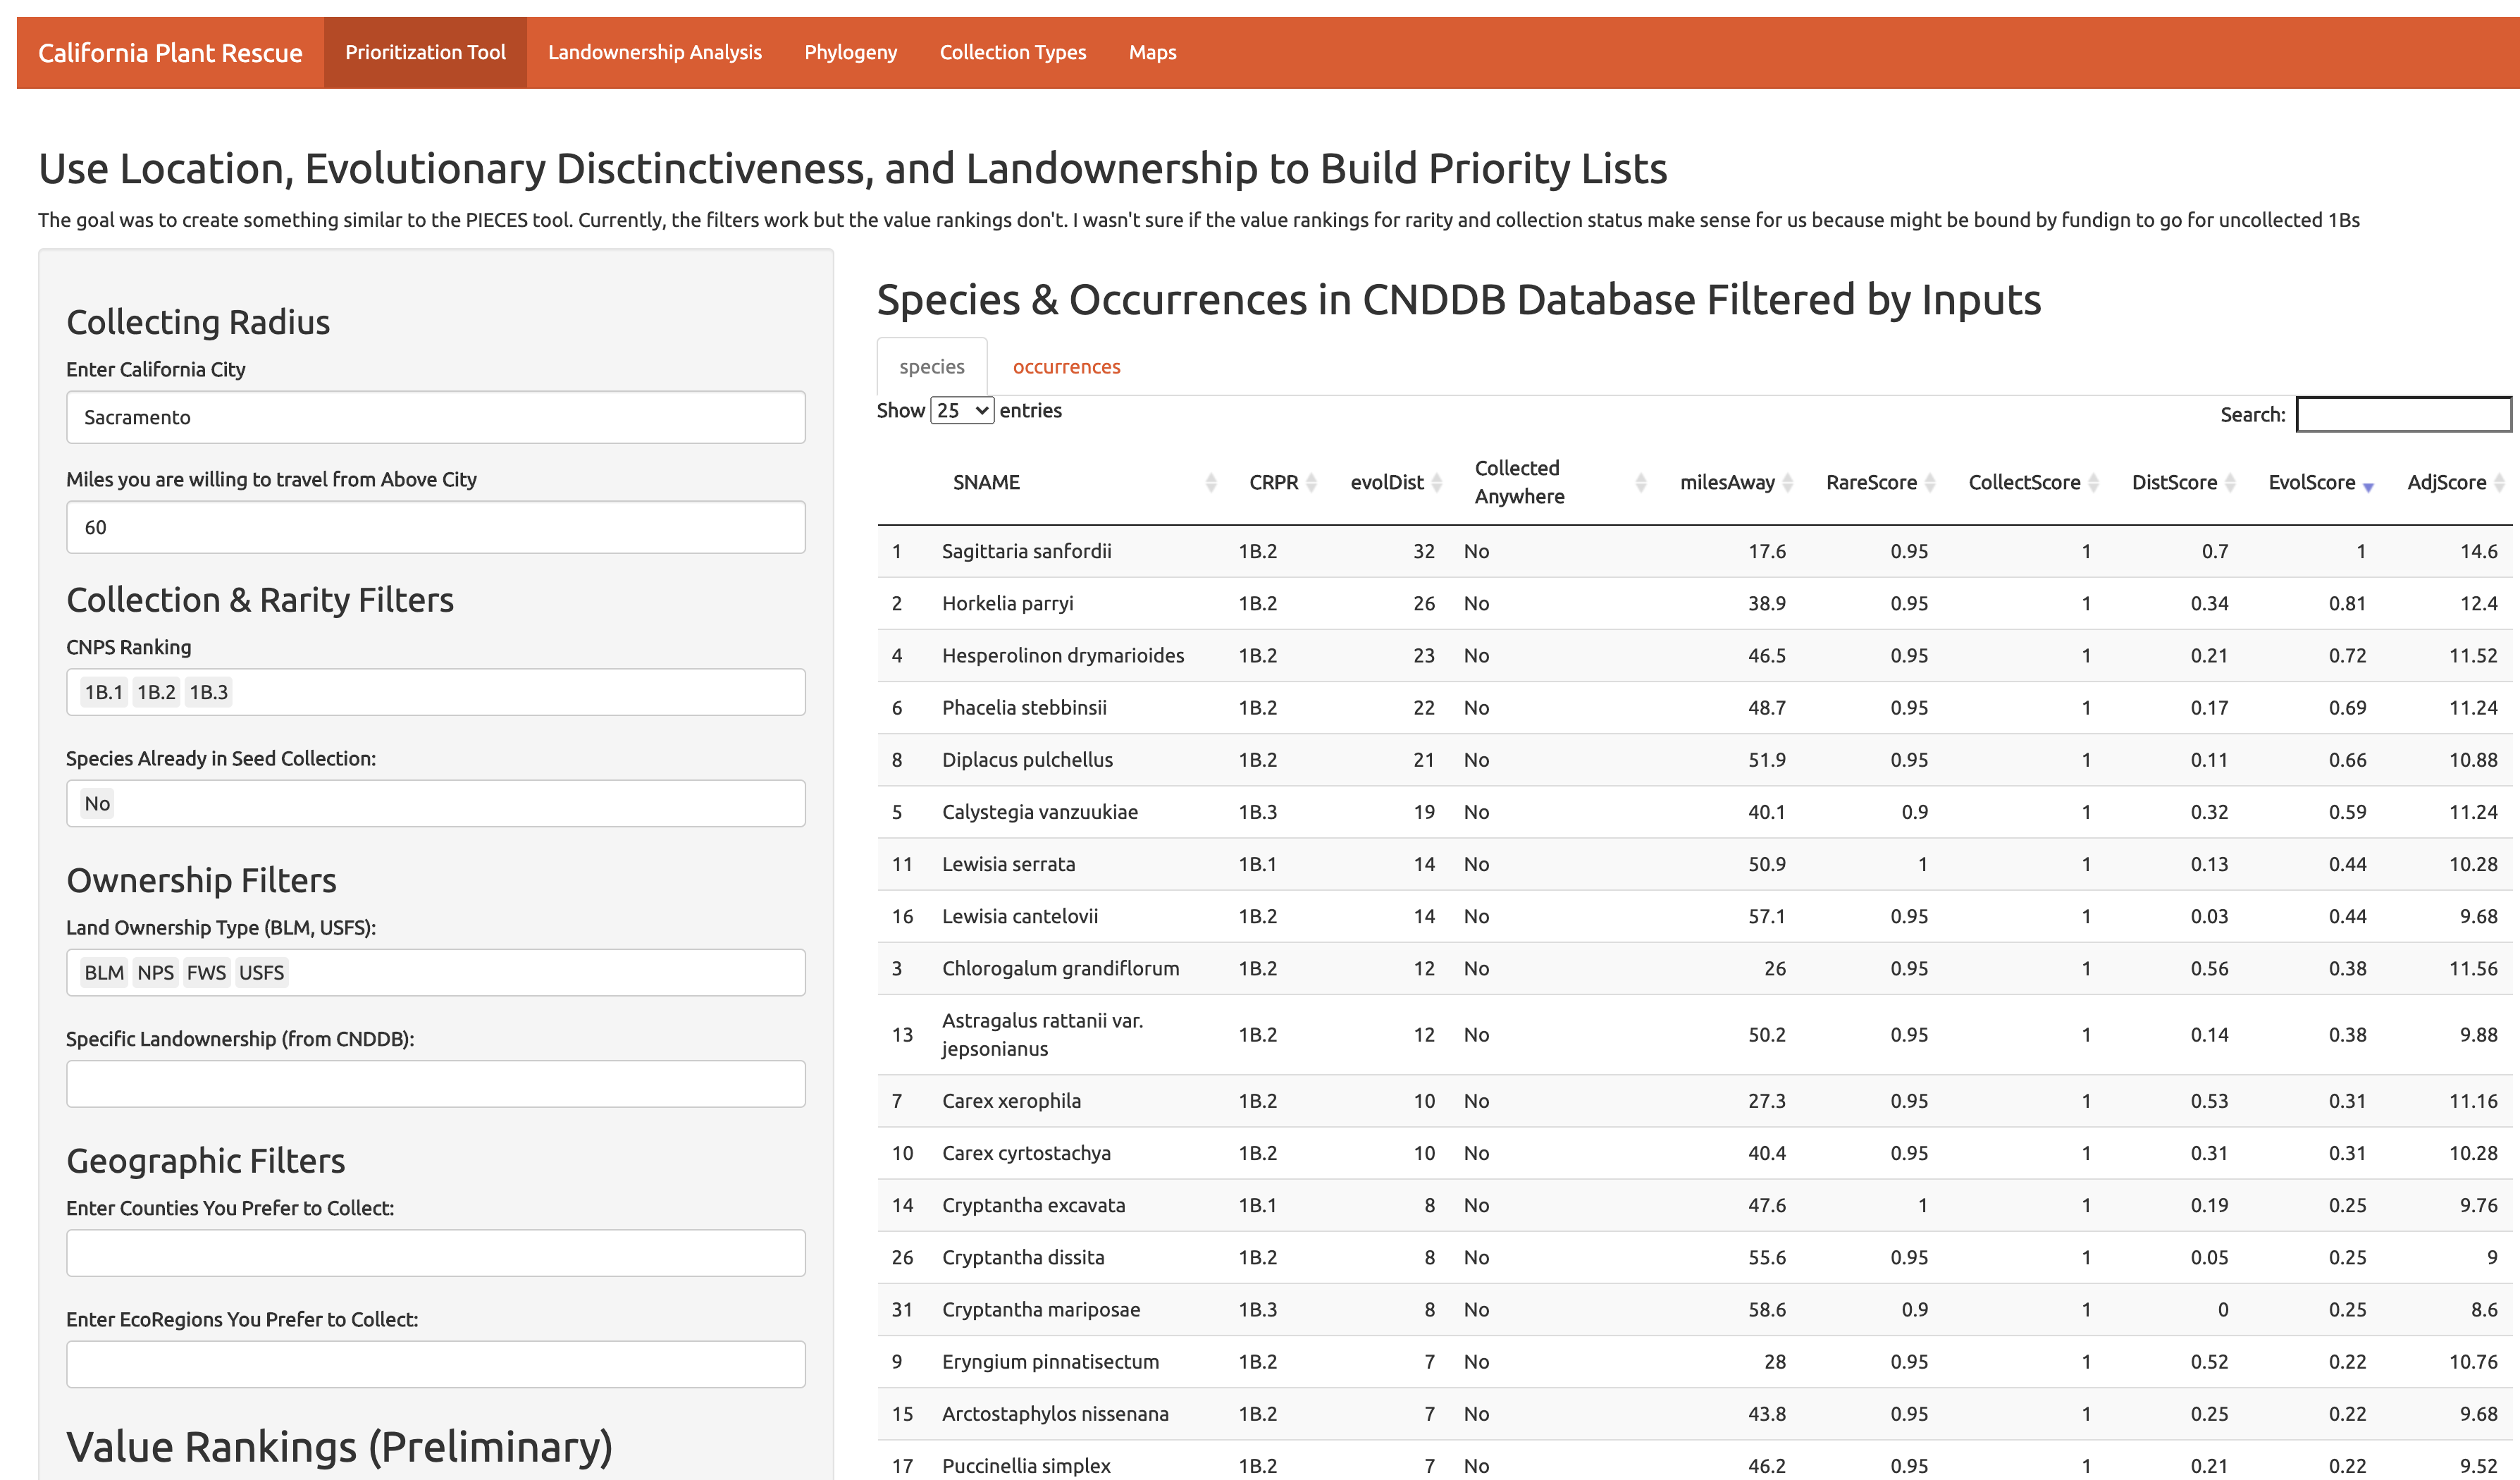 Screen shot of Species and Occurrences in CNDDB Database